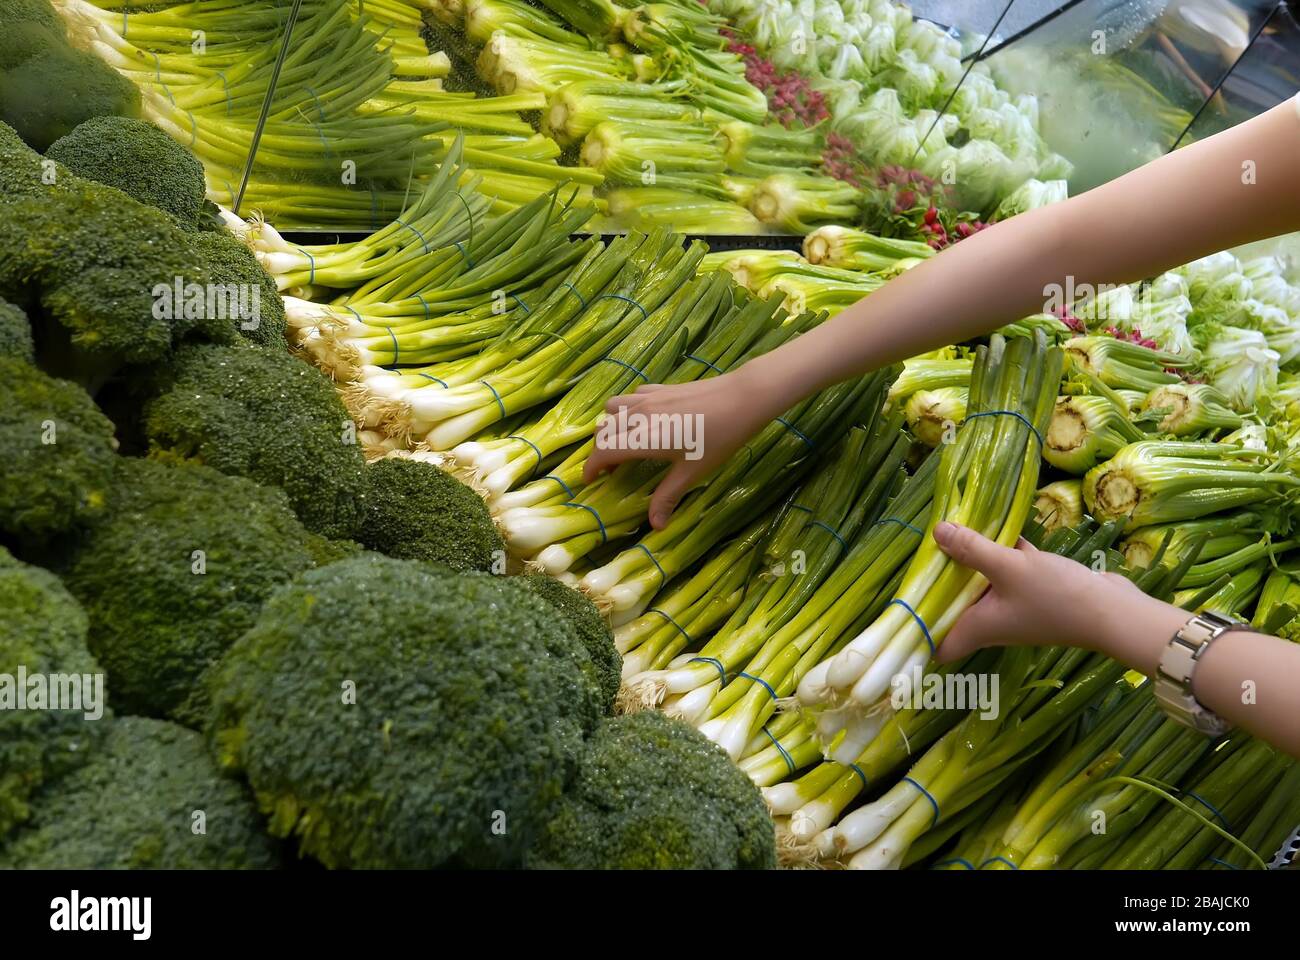 Woman selecting green onion in grocery store Stock Photo